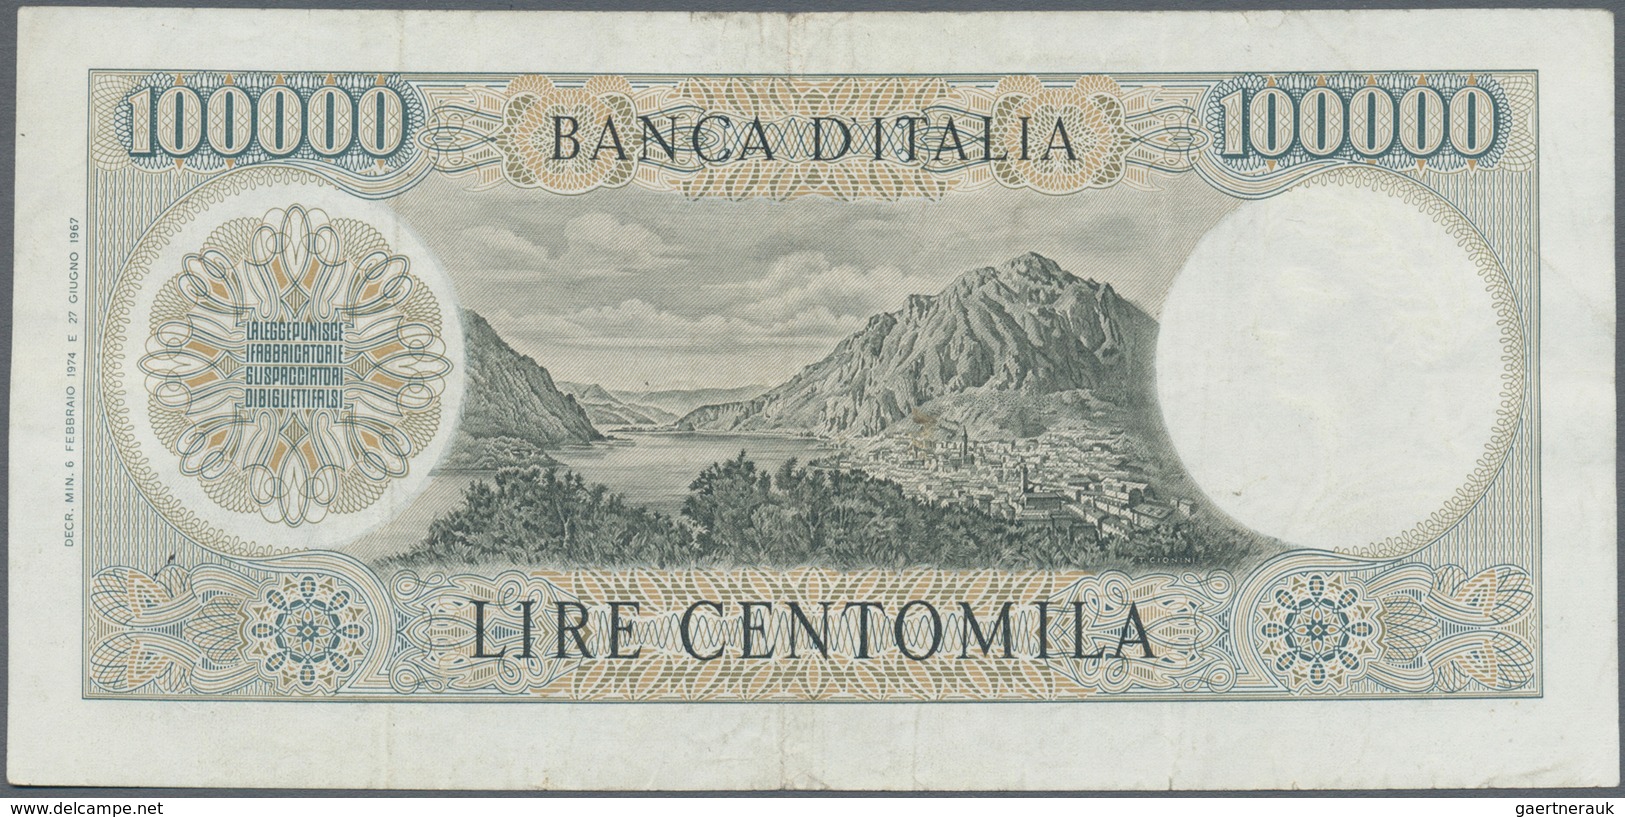 Italy / Italien: 100.000 Lire 1974 P. 100c Manzoni, S/N D122784F, Several Folds In Paper, Pressed, M - Sonstige & Ohne Zuordnung